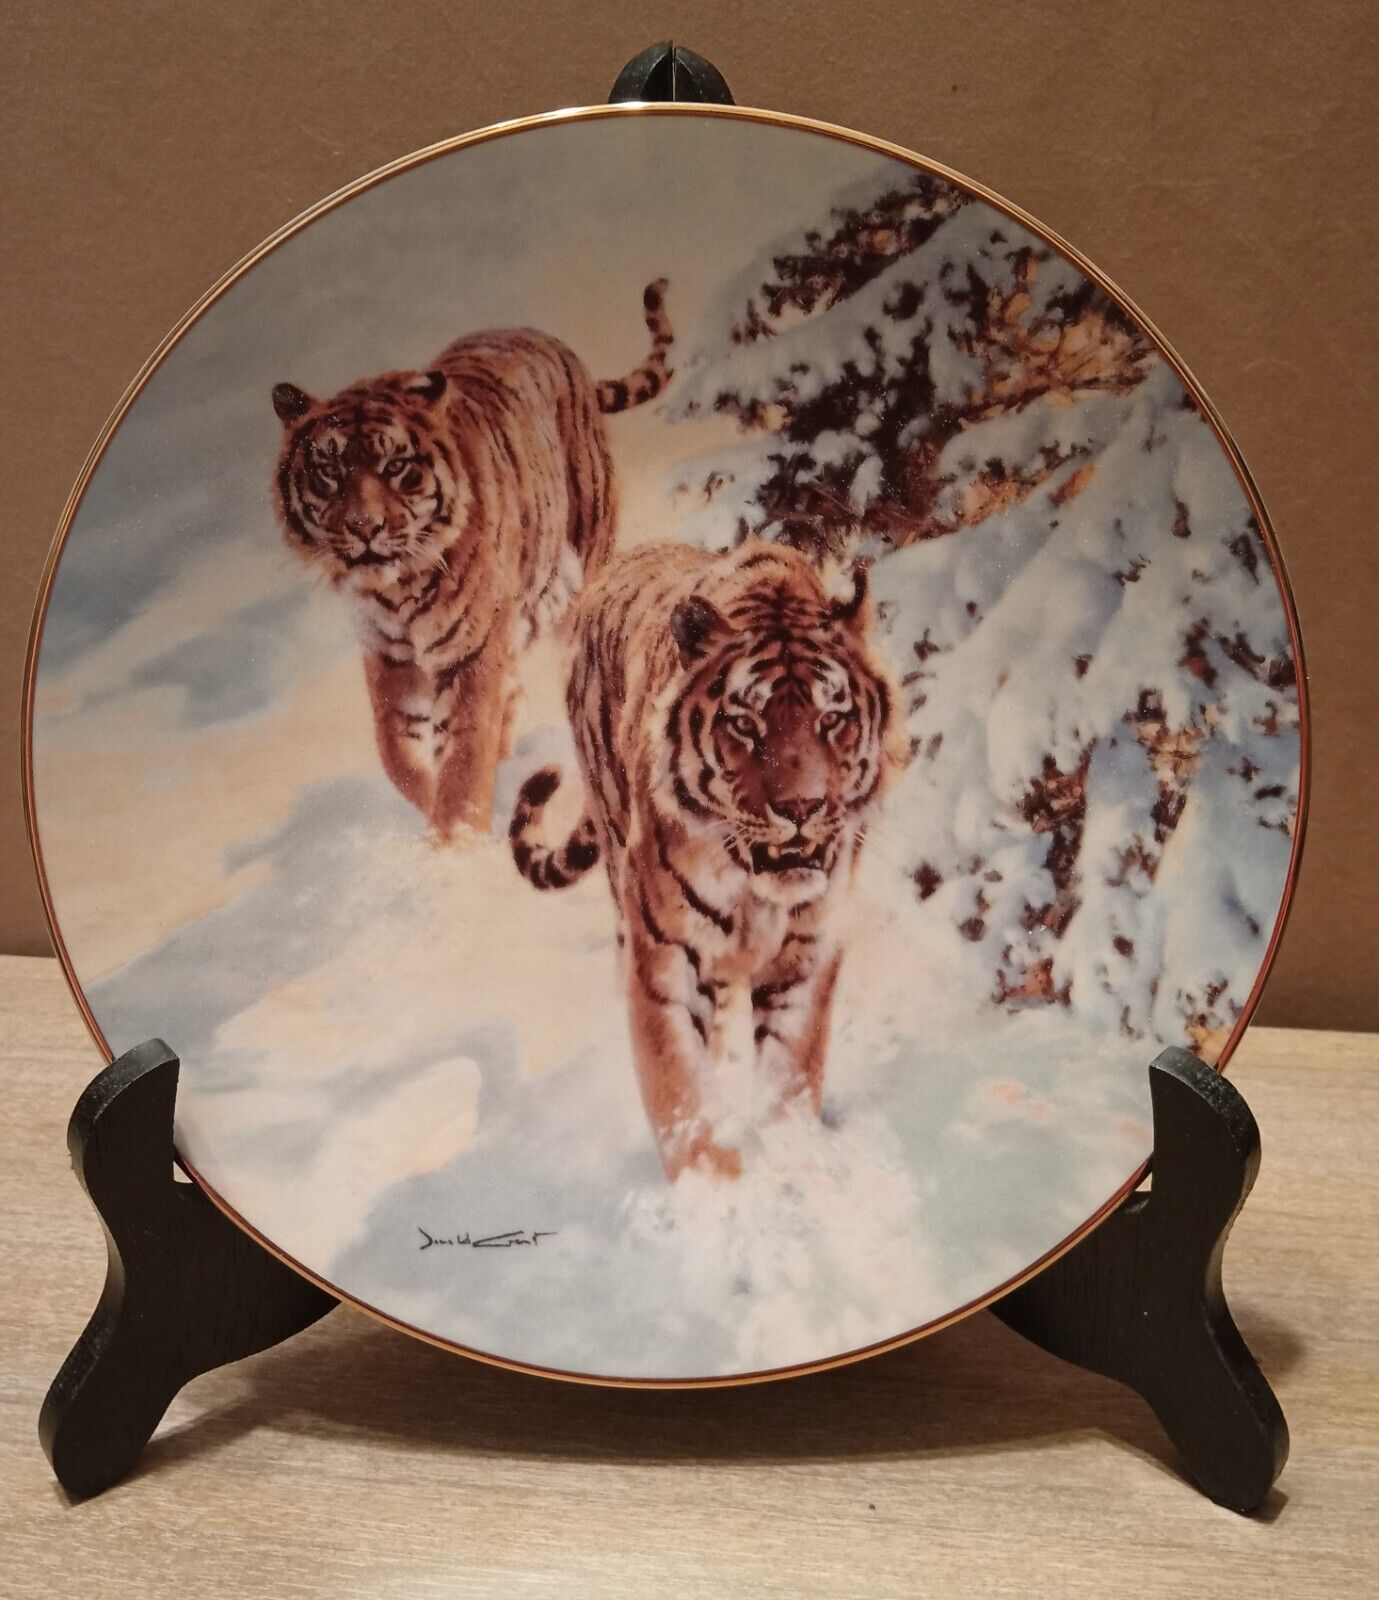 From The Bradford Exchange, a Decorative, Collectible Plate, \'Siberian Snow Tige